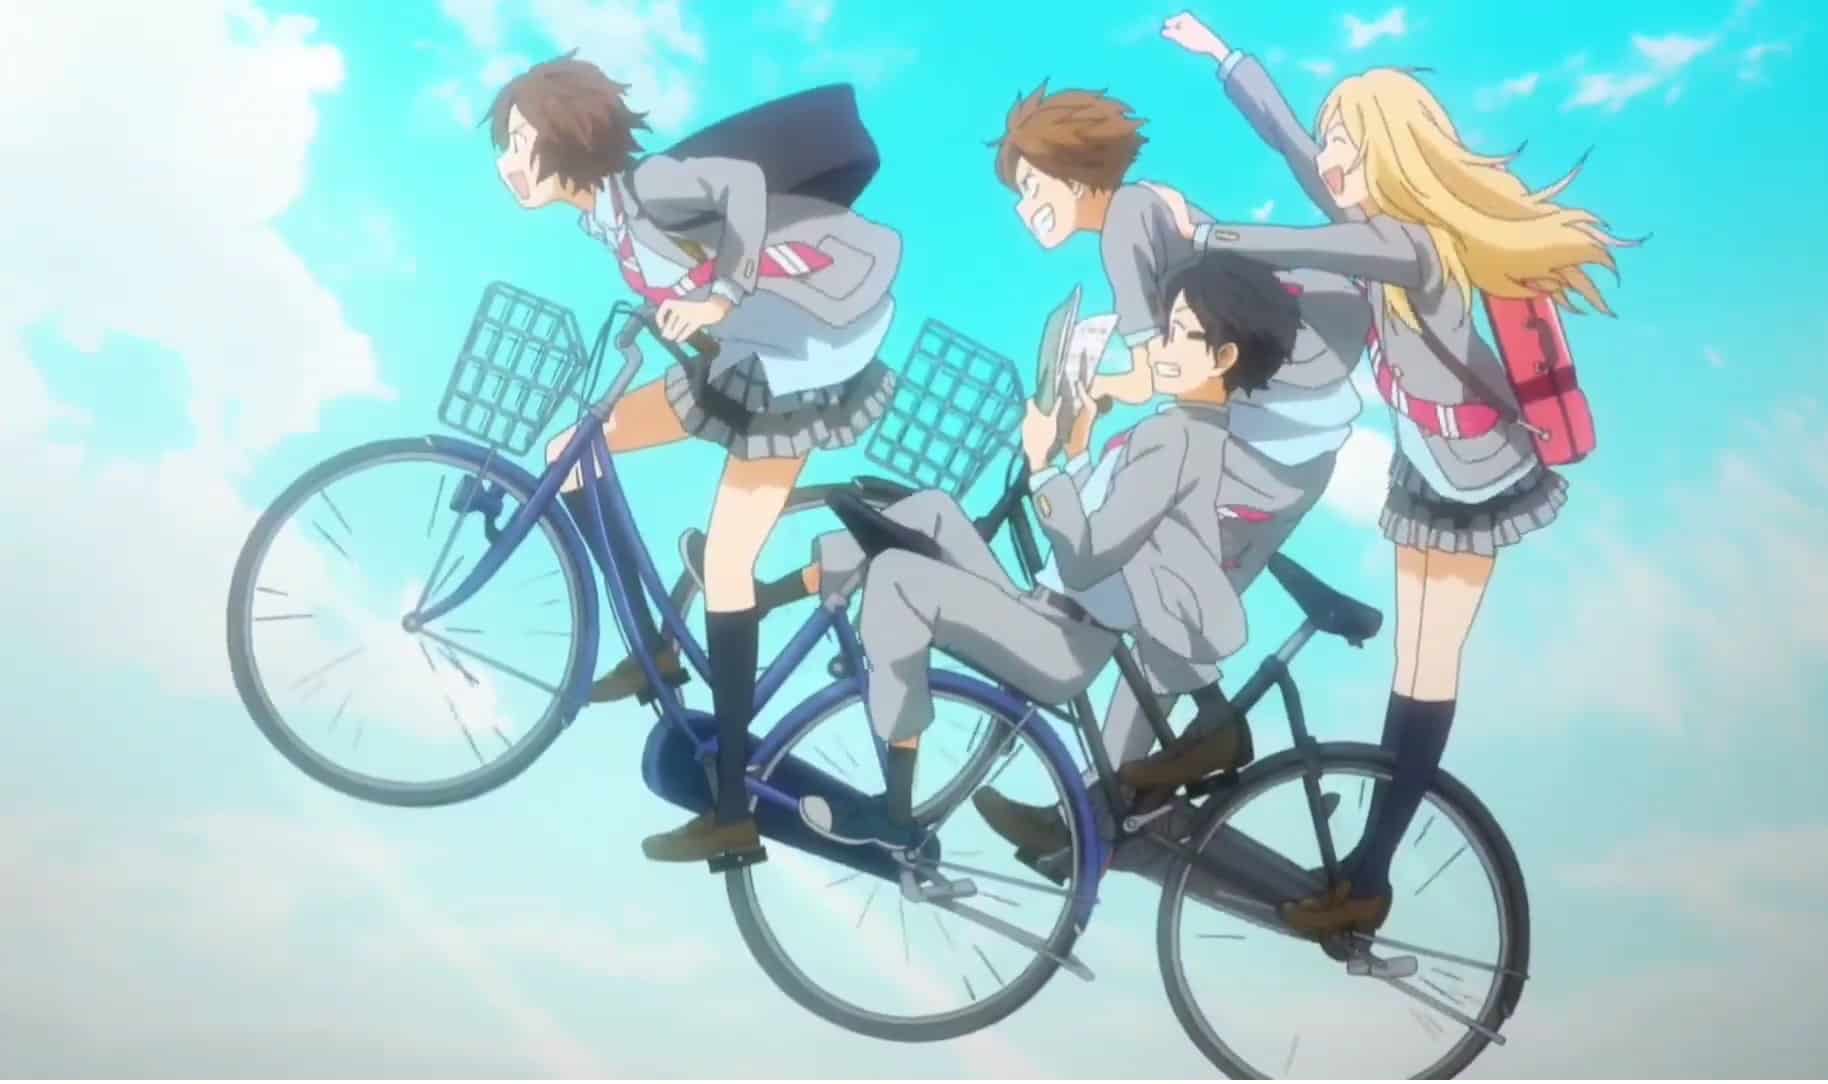 The bicycle episode